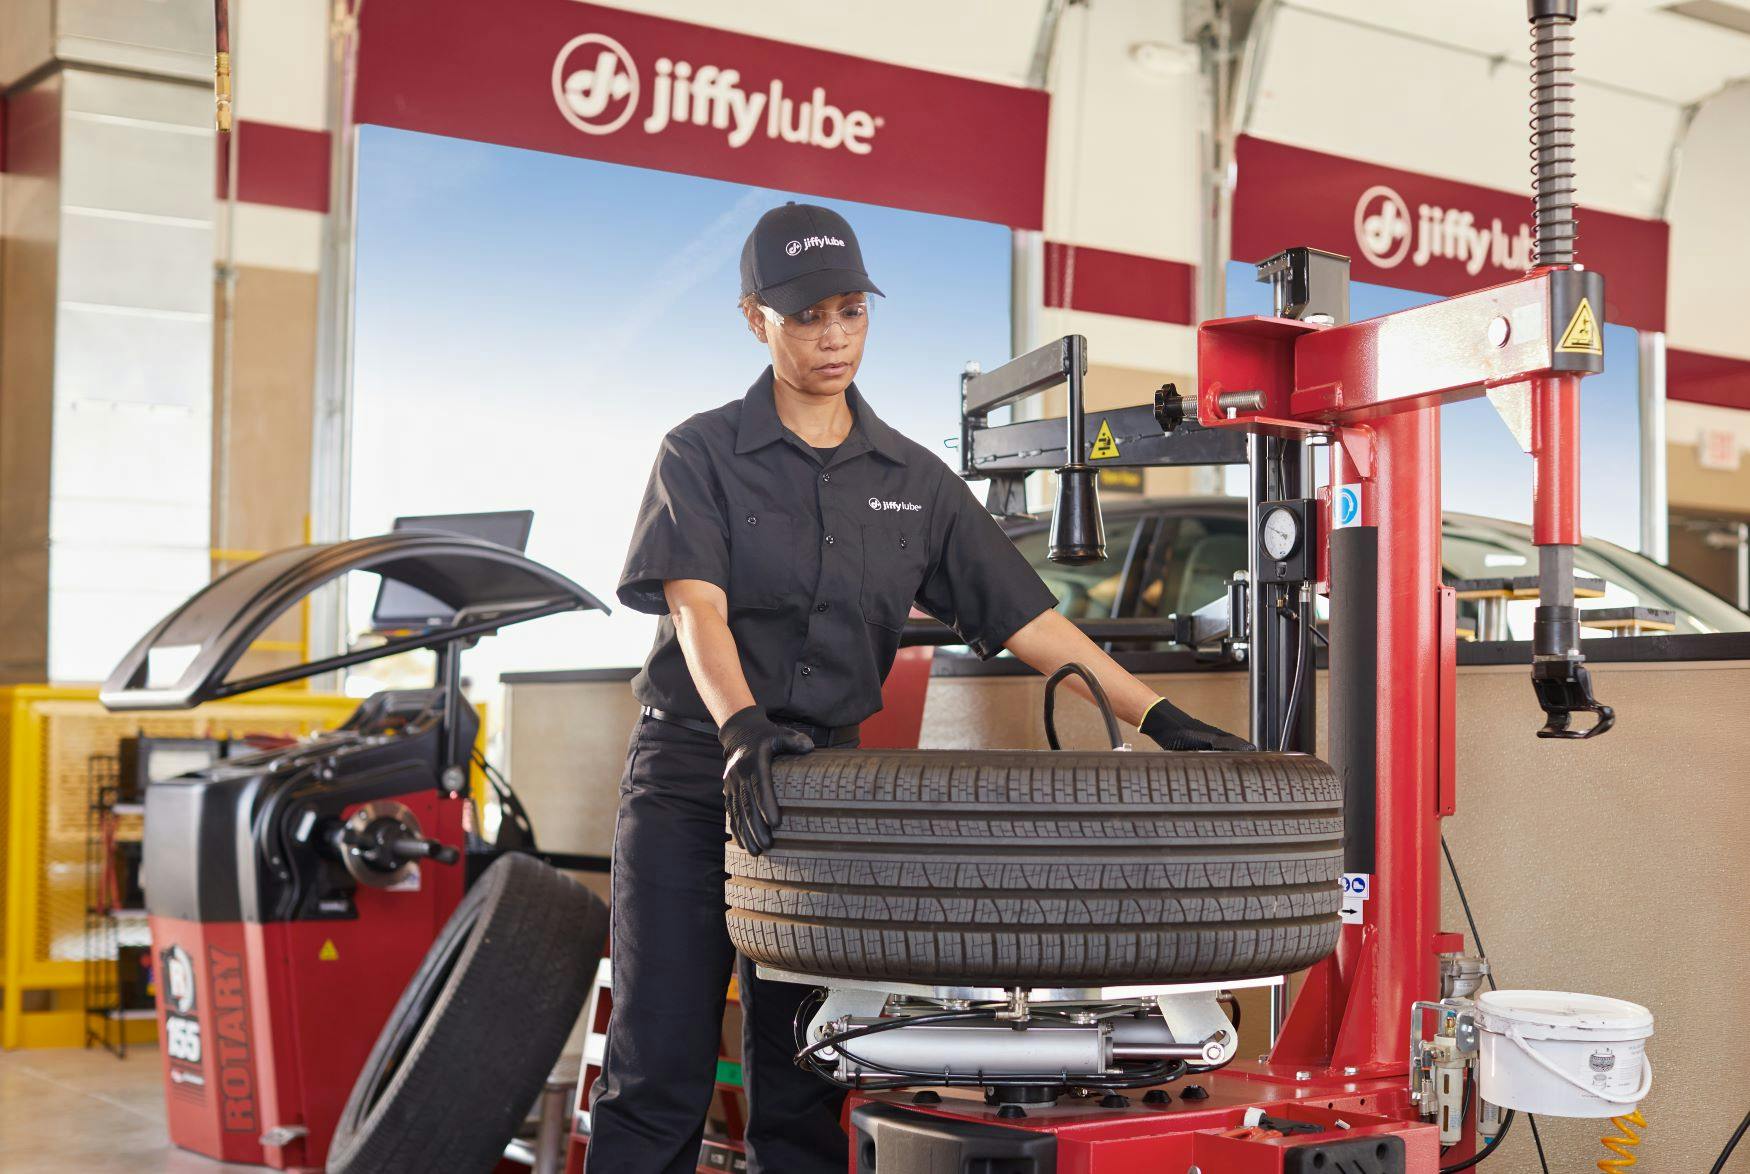 Jiffy Lube technician using a machine to balance a vehicle's tire during a tire inspection and/or replacement service